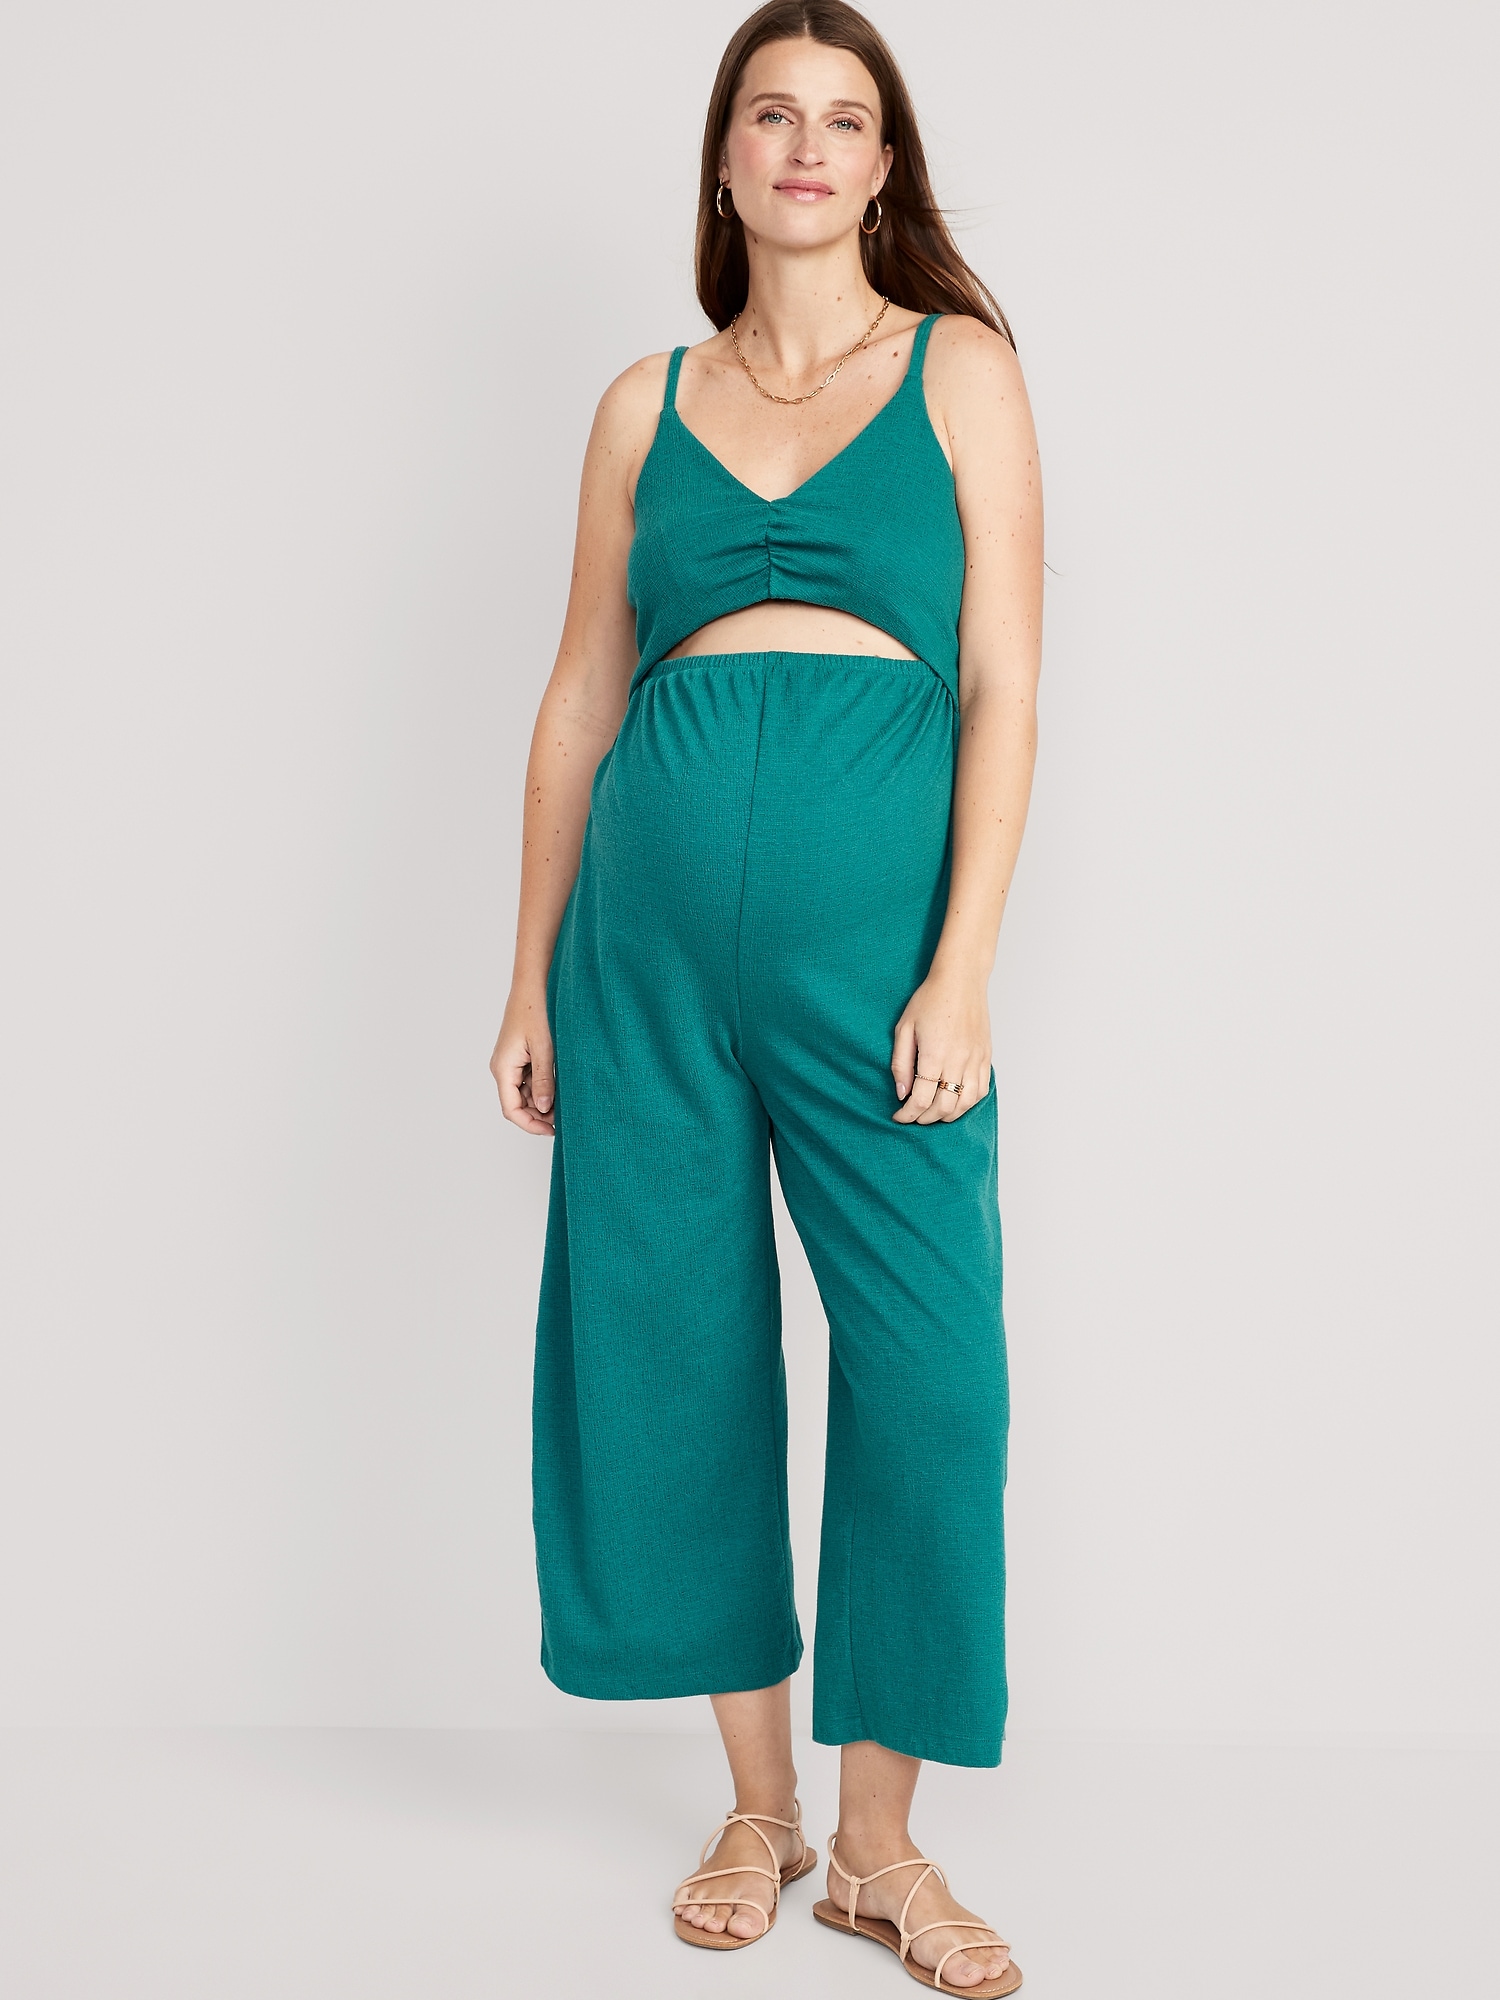 Buy Plus Size Jumpsuits Online in India | Myntra